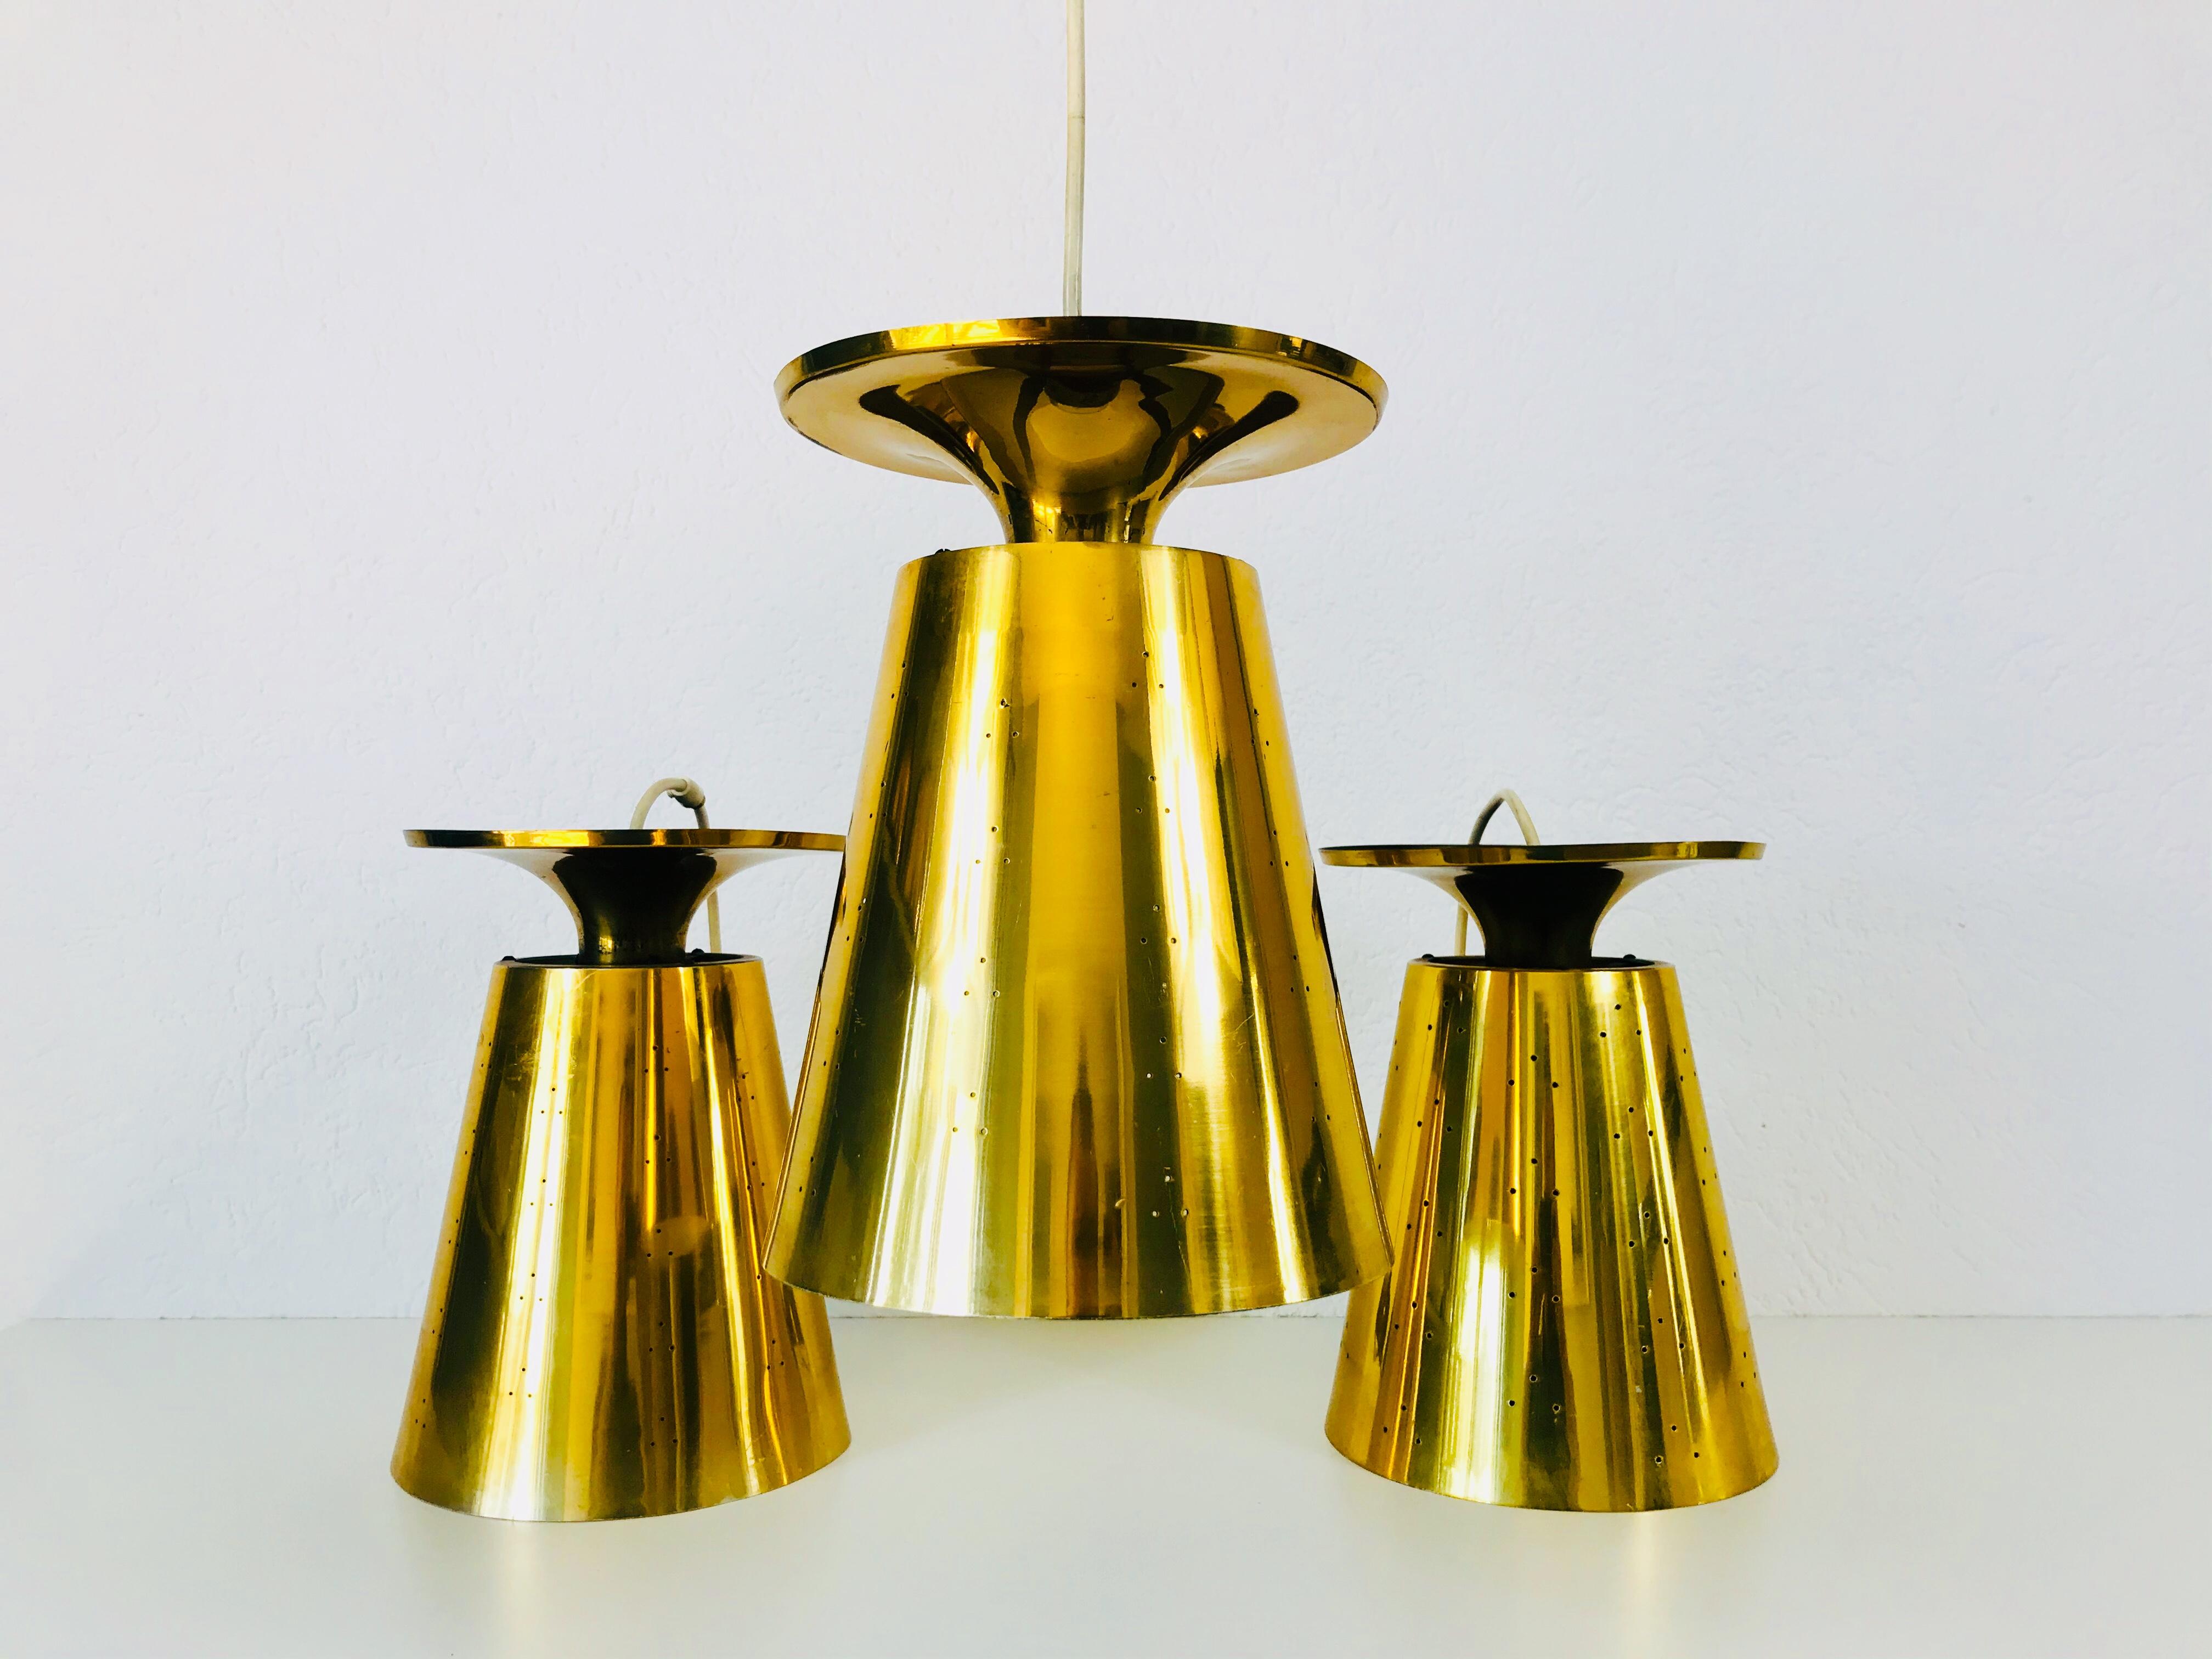 Italian Set of 3 Polished Brass Pendant Lamps Attributed to Paavo Tynell, 1950s For Sale